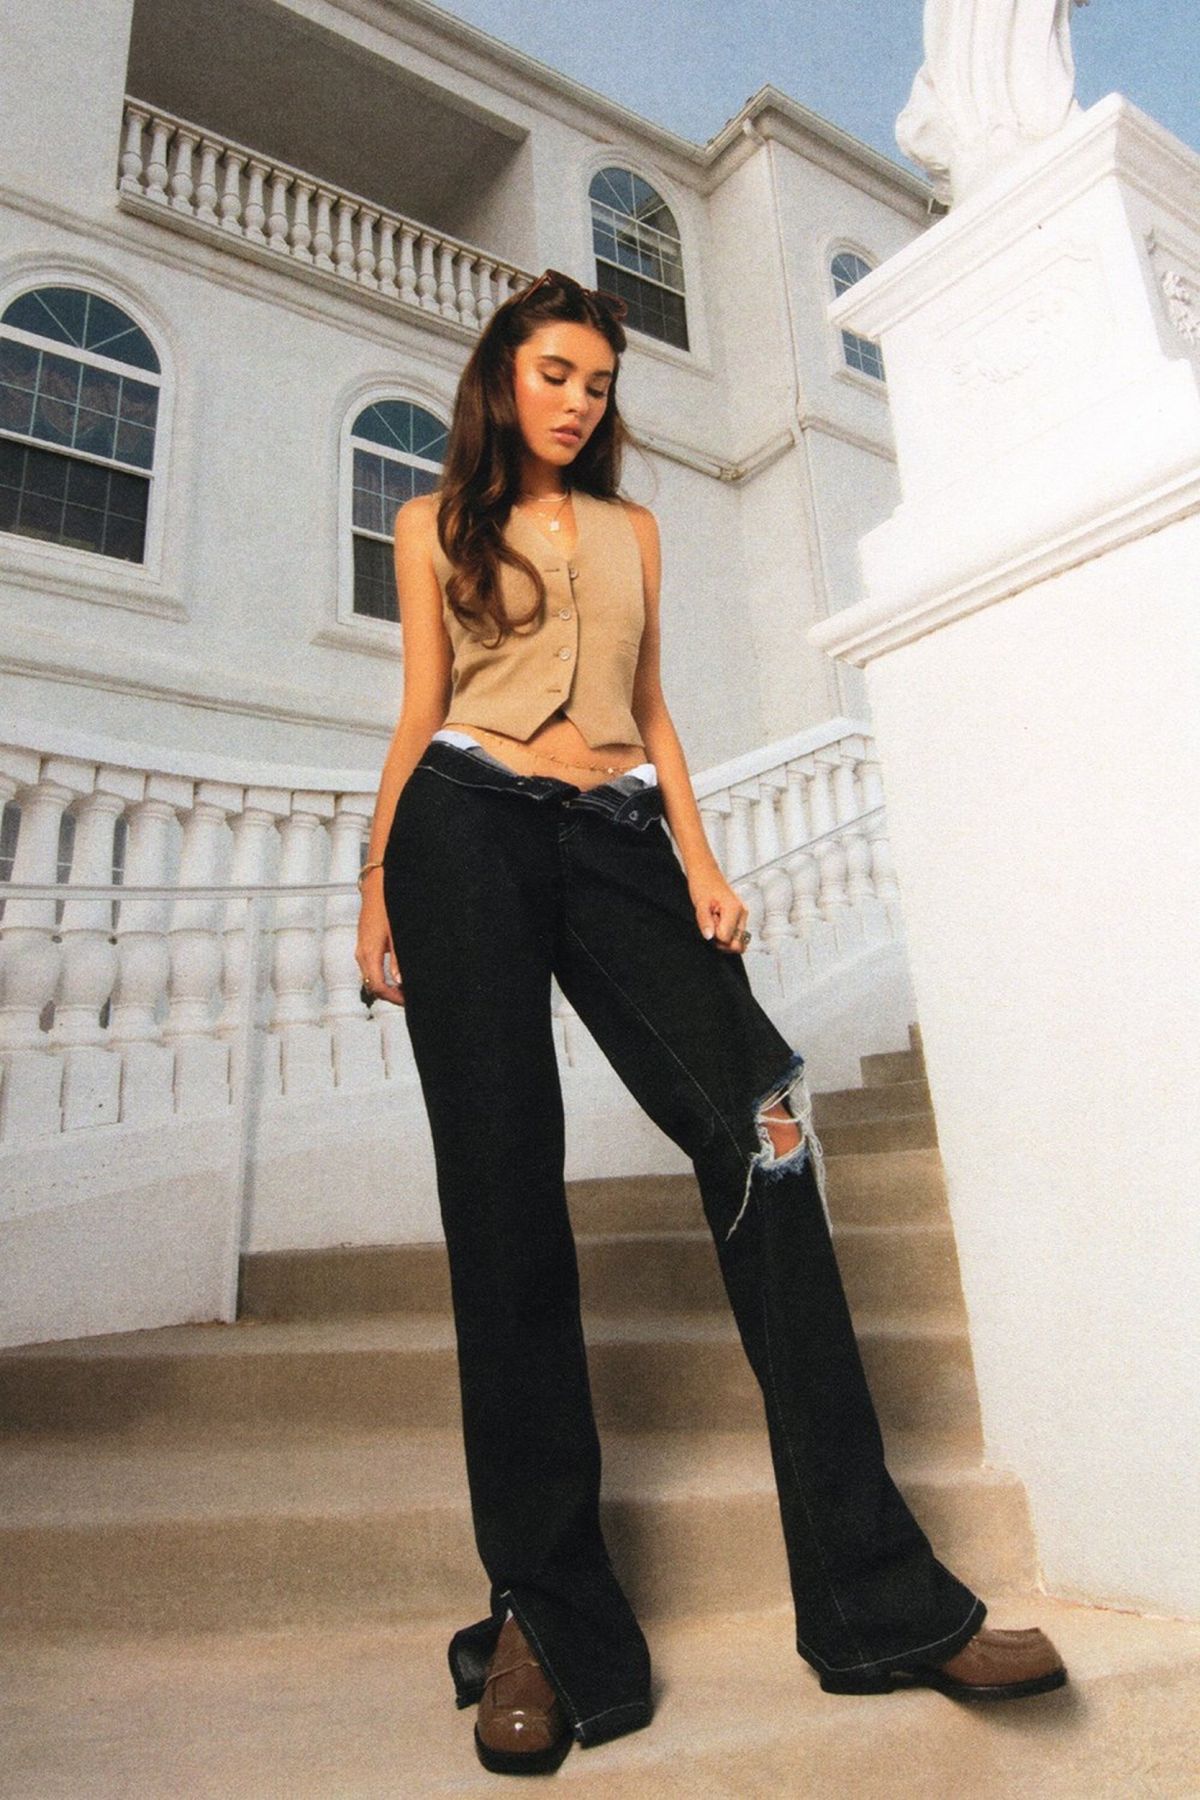 Madison beer fit pics